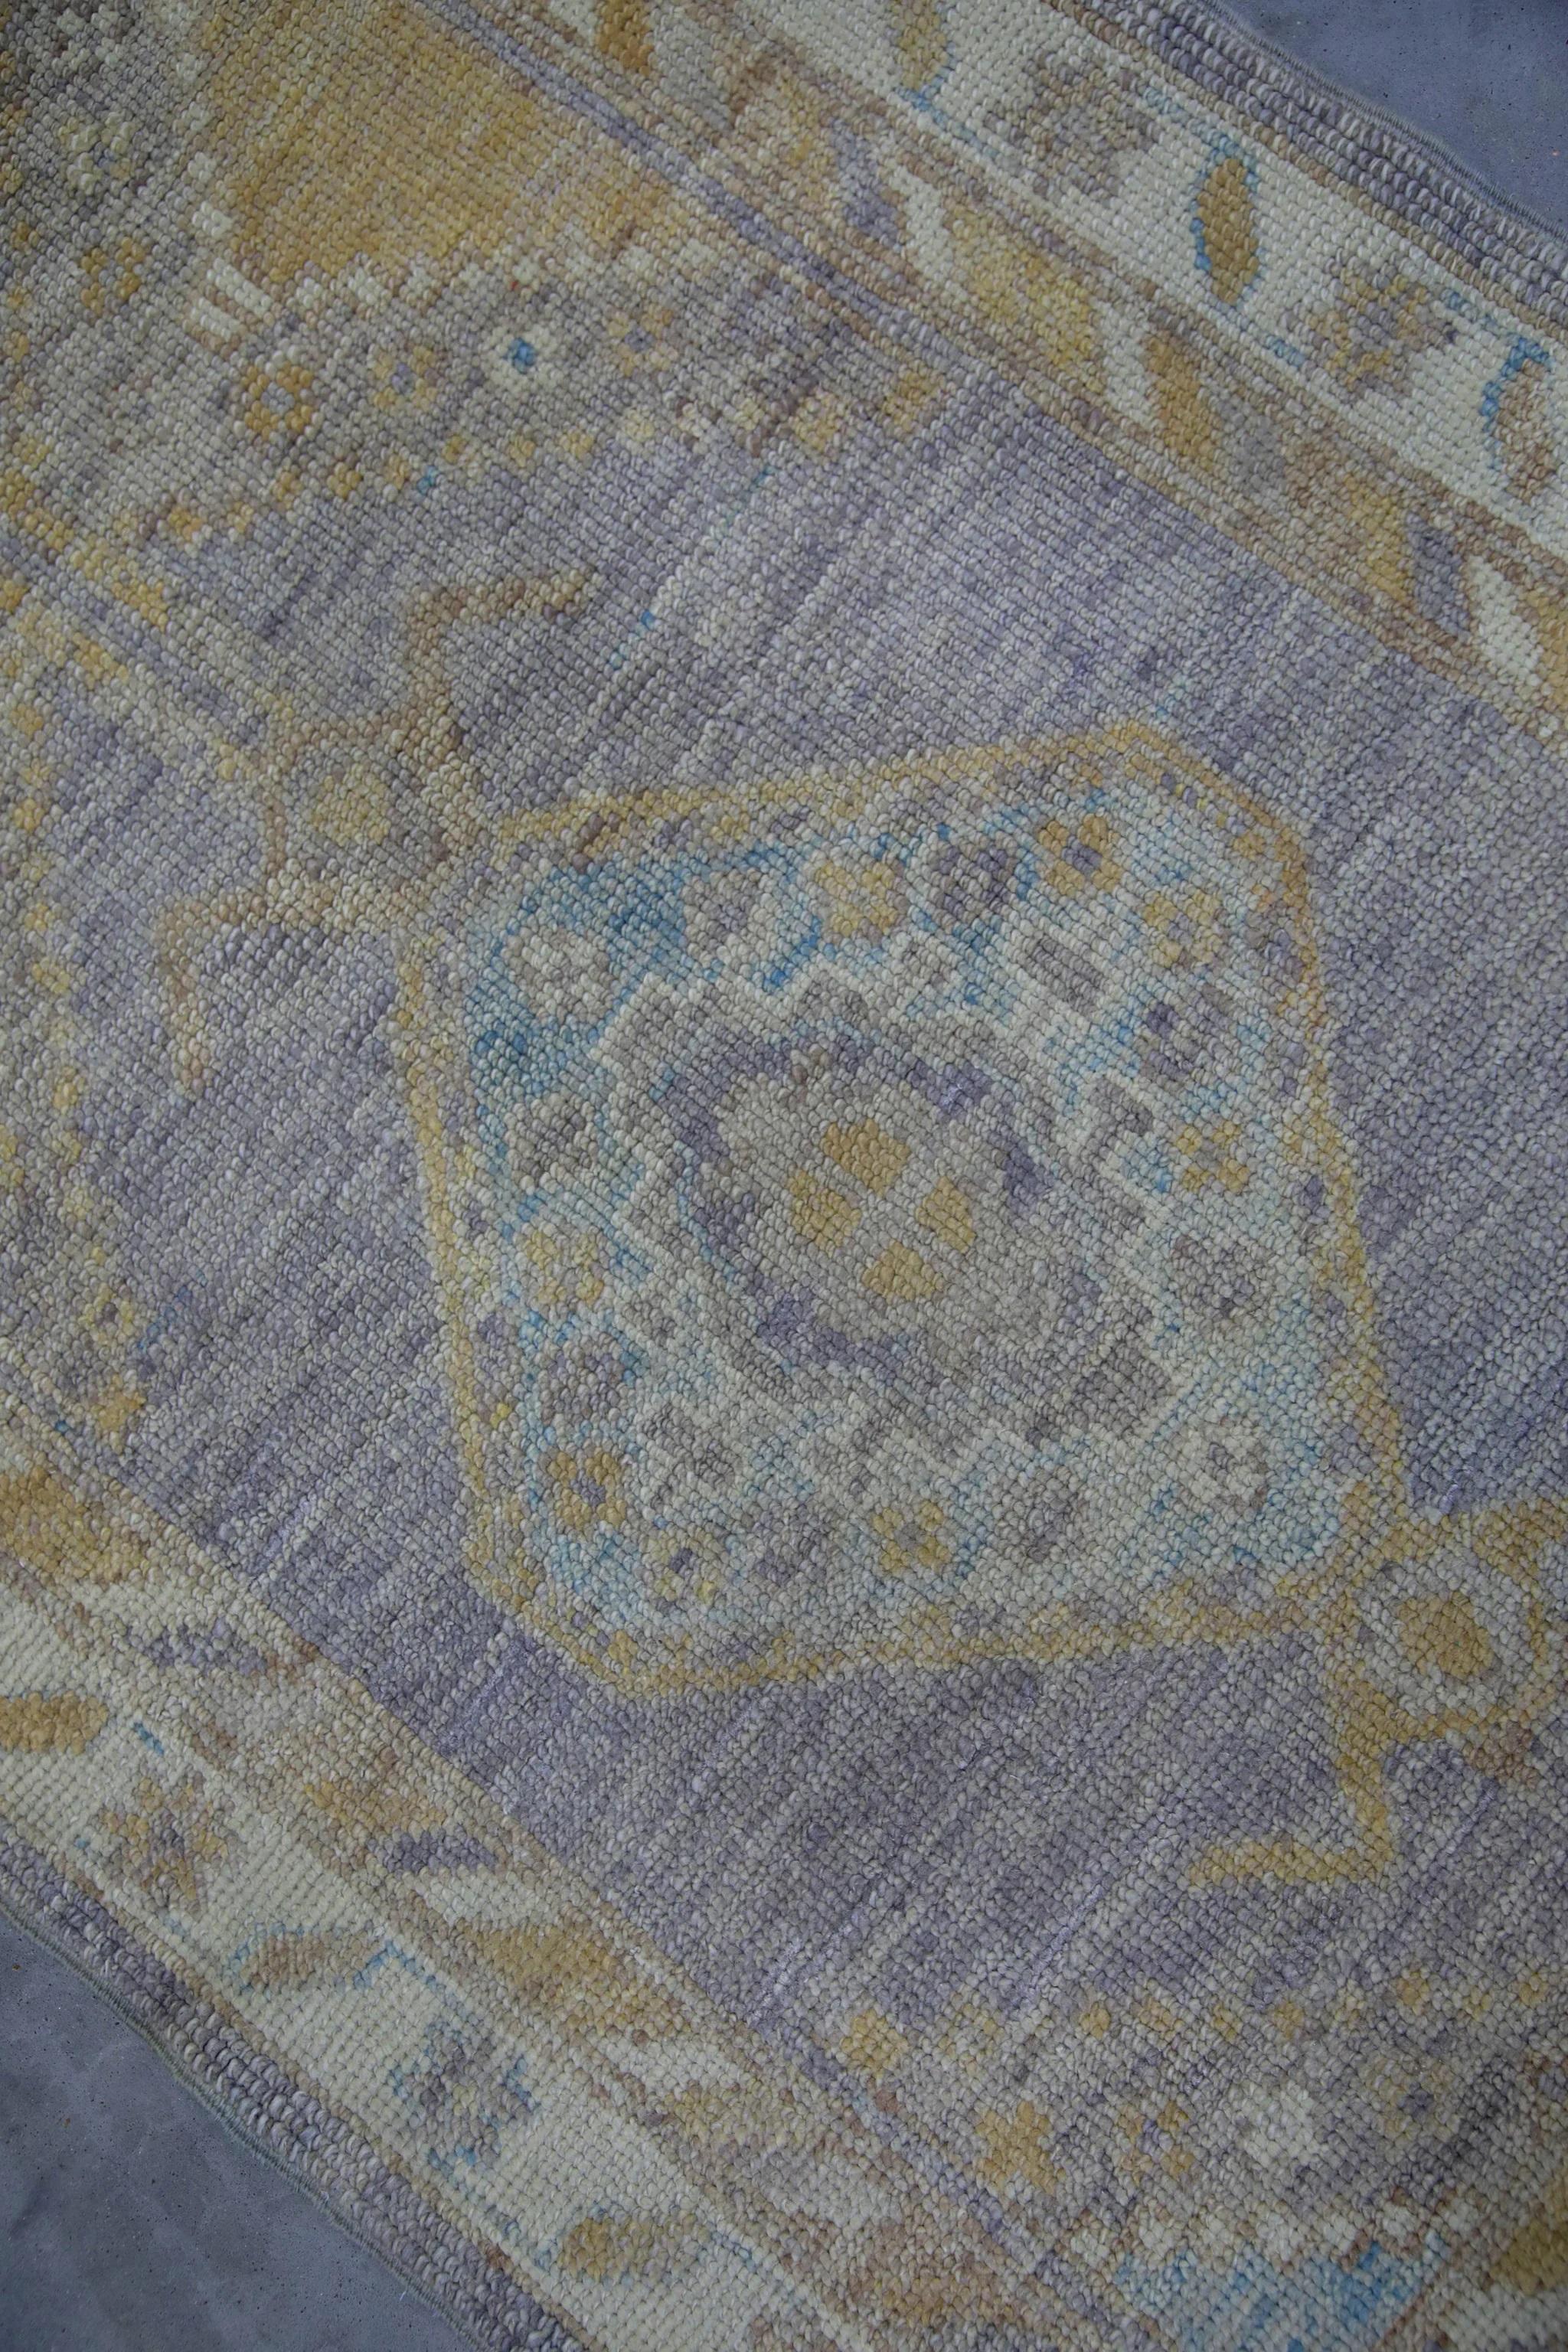 Contemporary Soft Purple Floral Handwoven Wool Turkish Oushak Rug 3' x 6'6